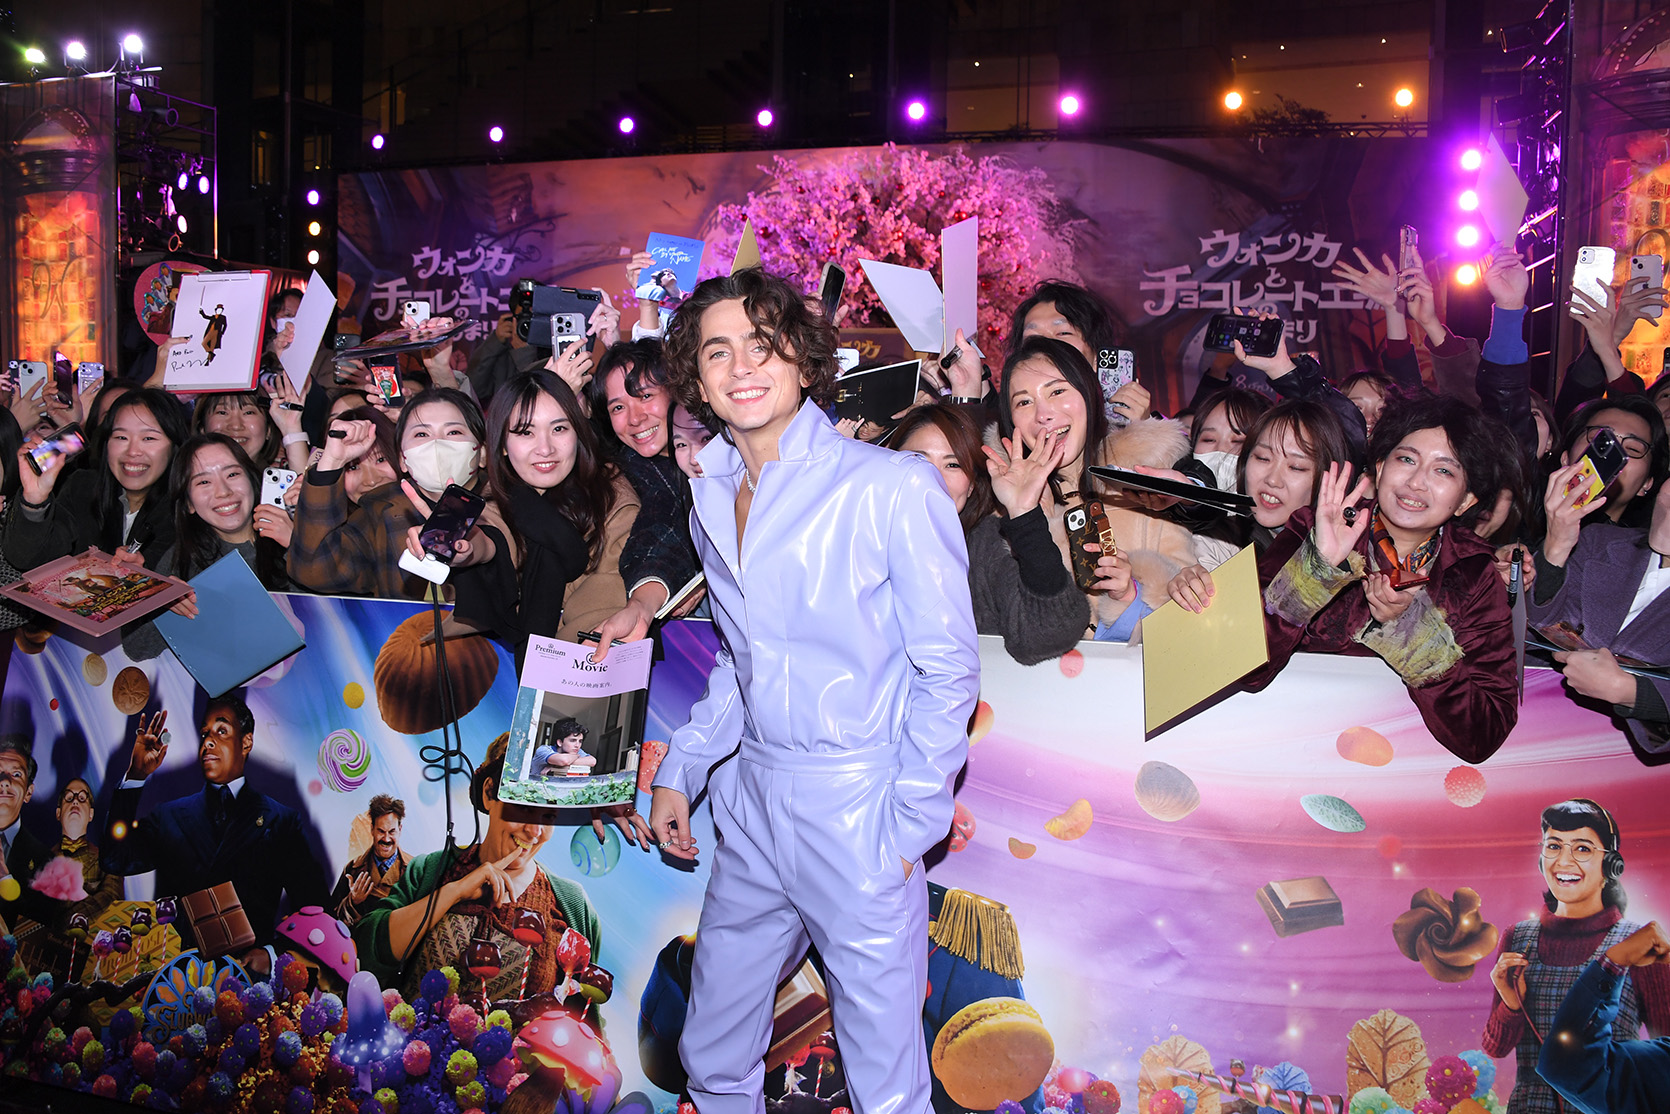 Willy Wonka Screening Event in Japan